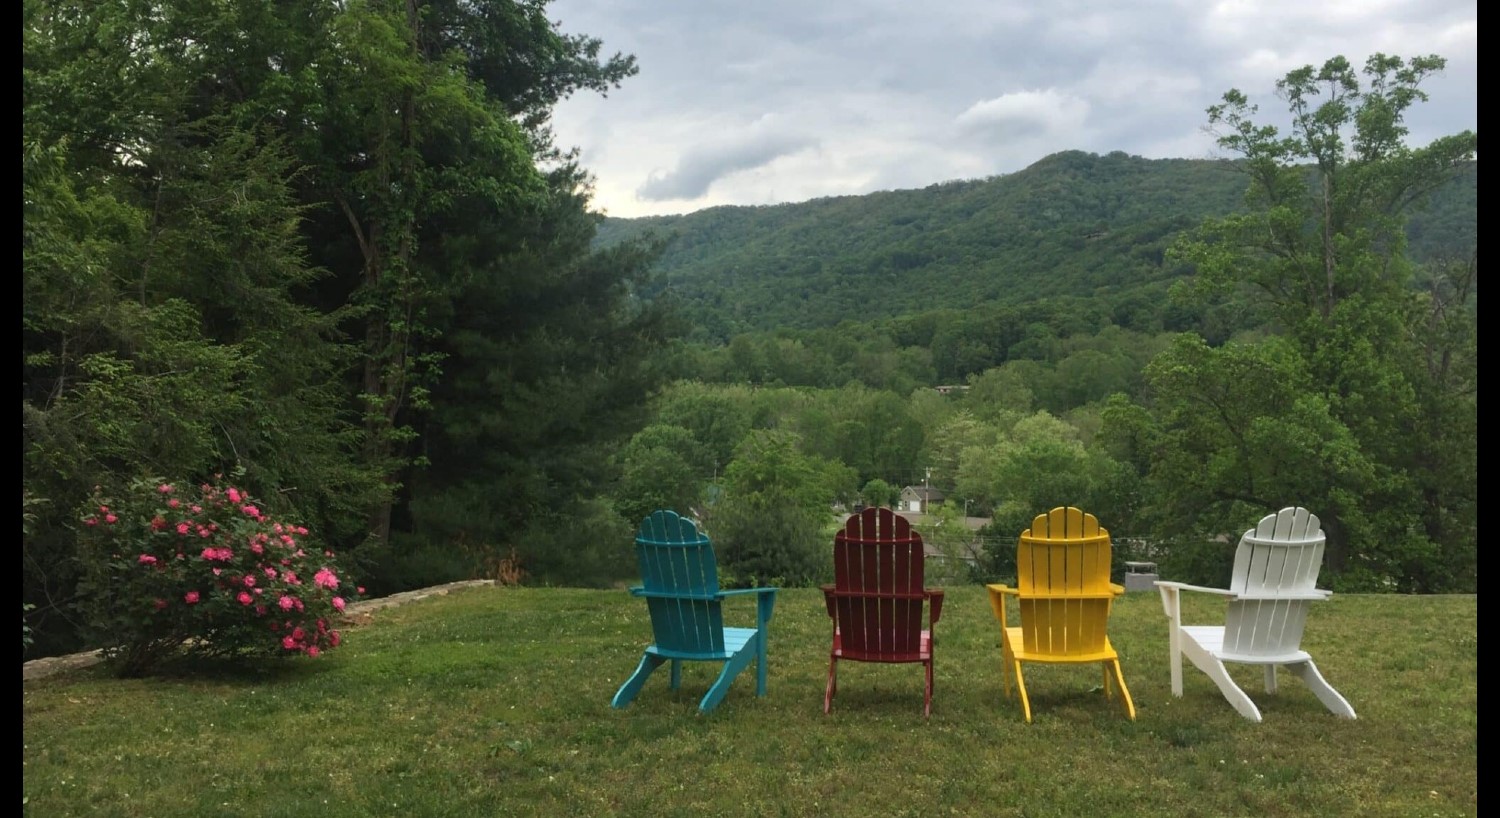 Chairs overlooking Eagle's Nest Mountain